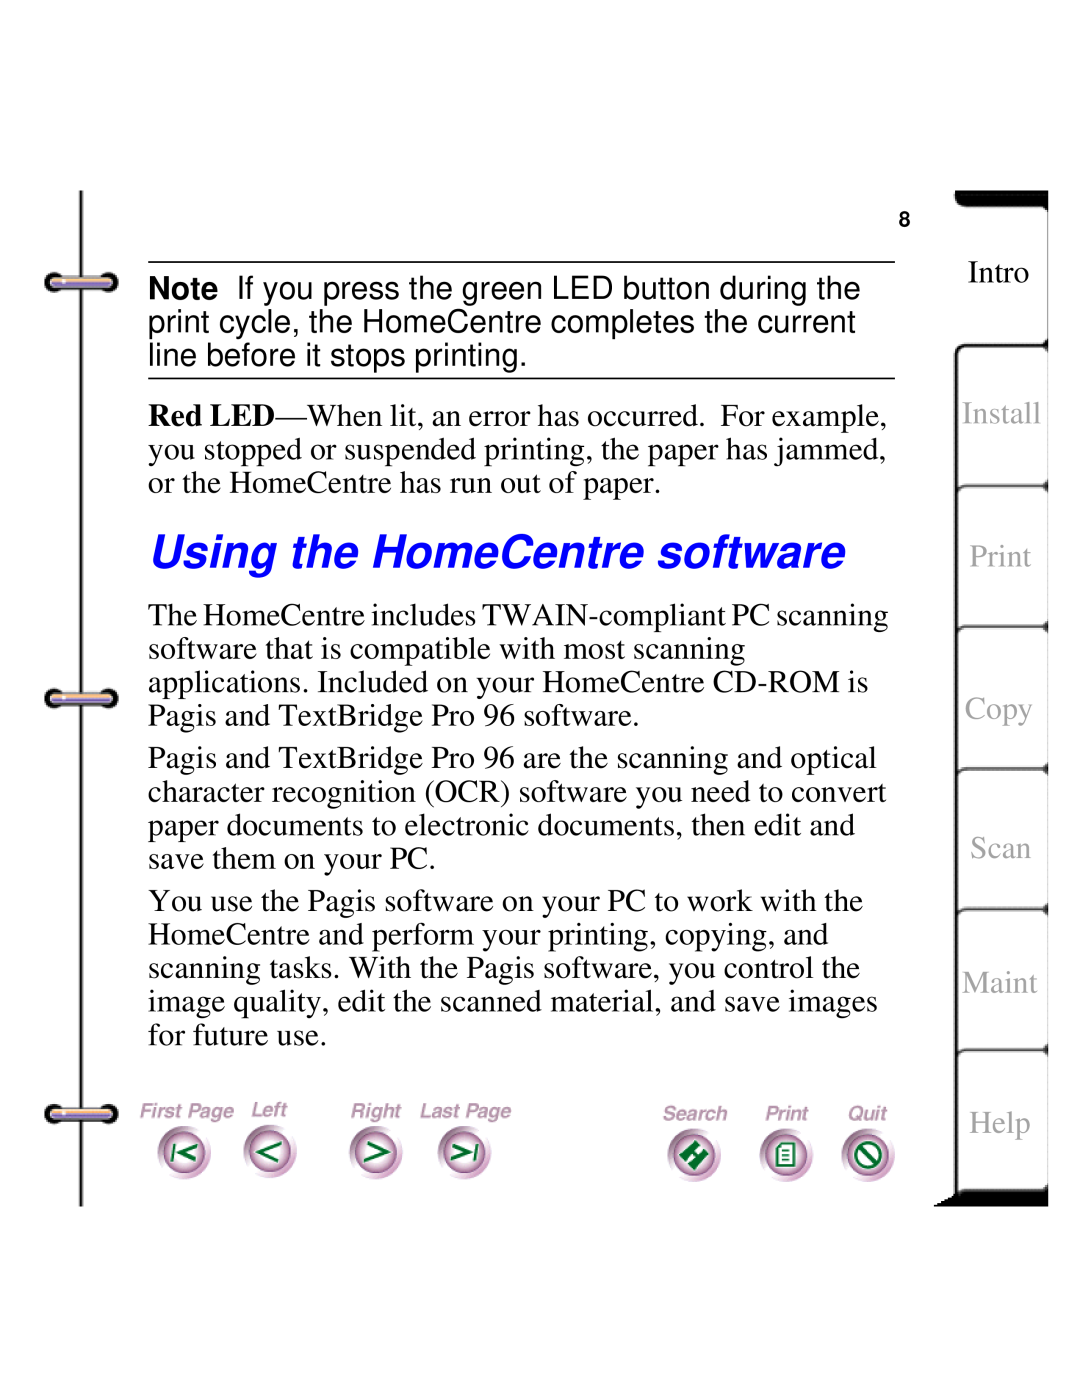 Xerox Document HomeCentre manual Using the HomeCentre software, Install Print Copy Scan Maint, Help 